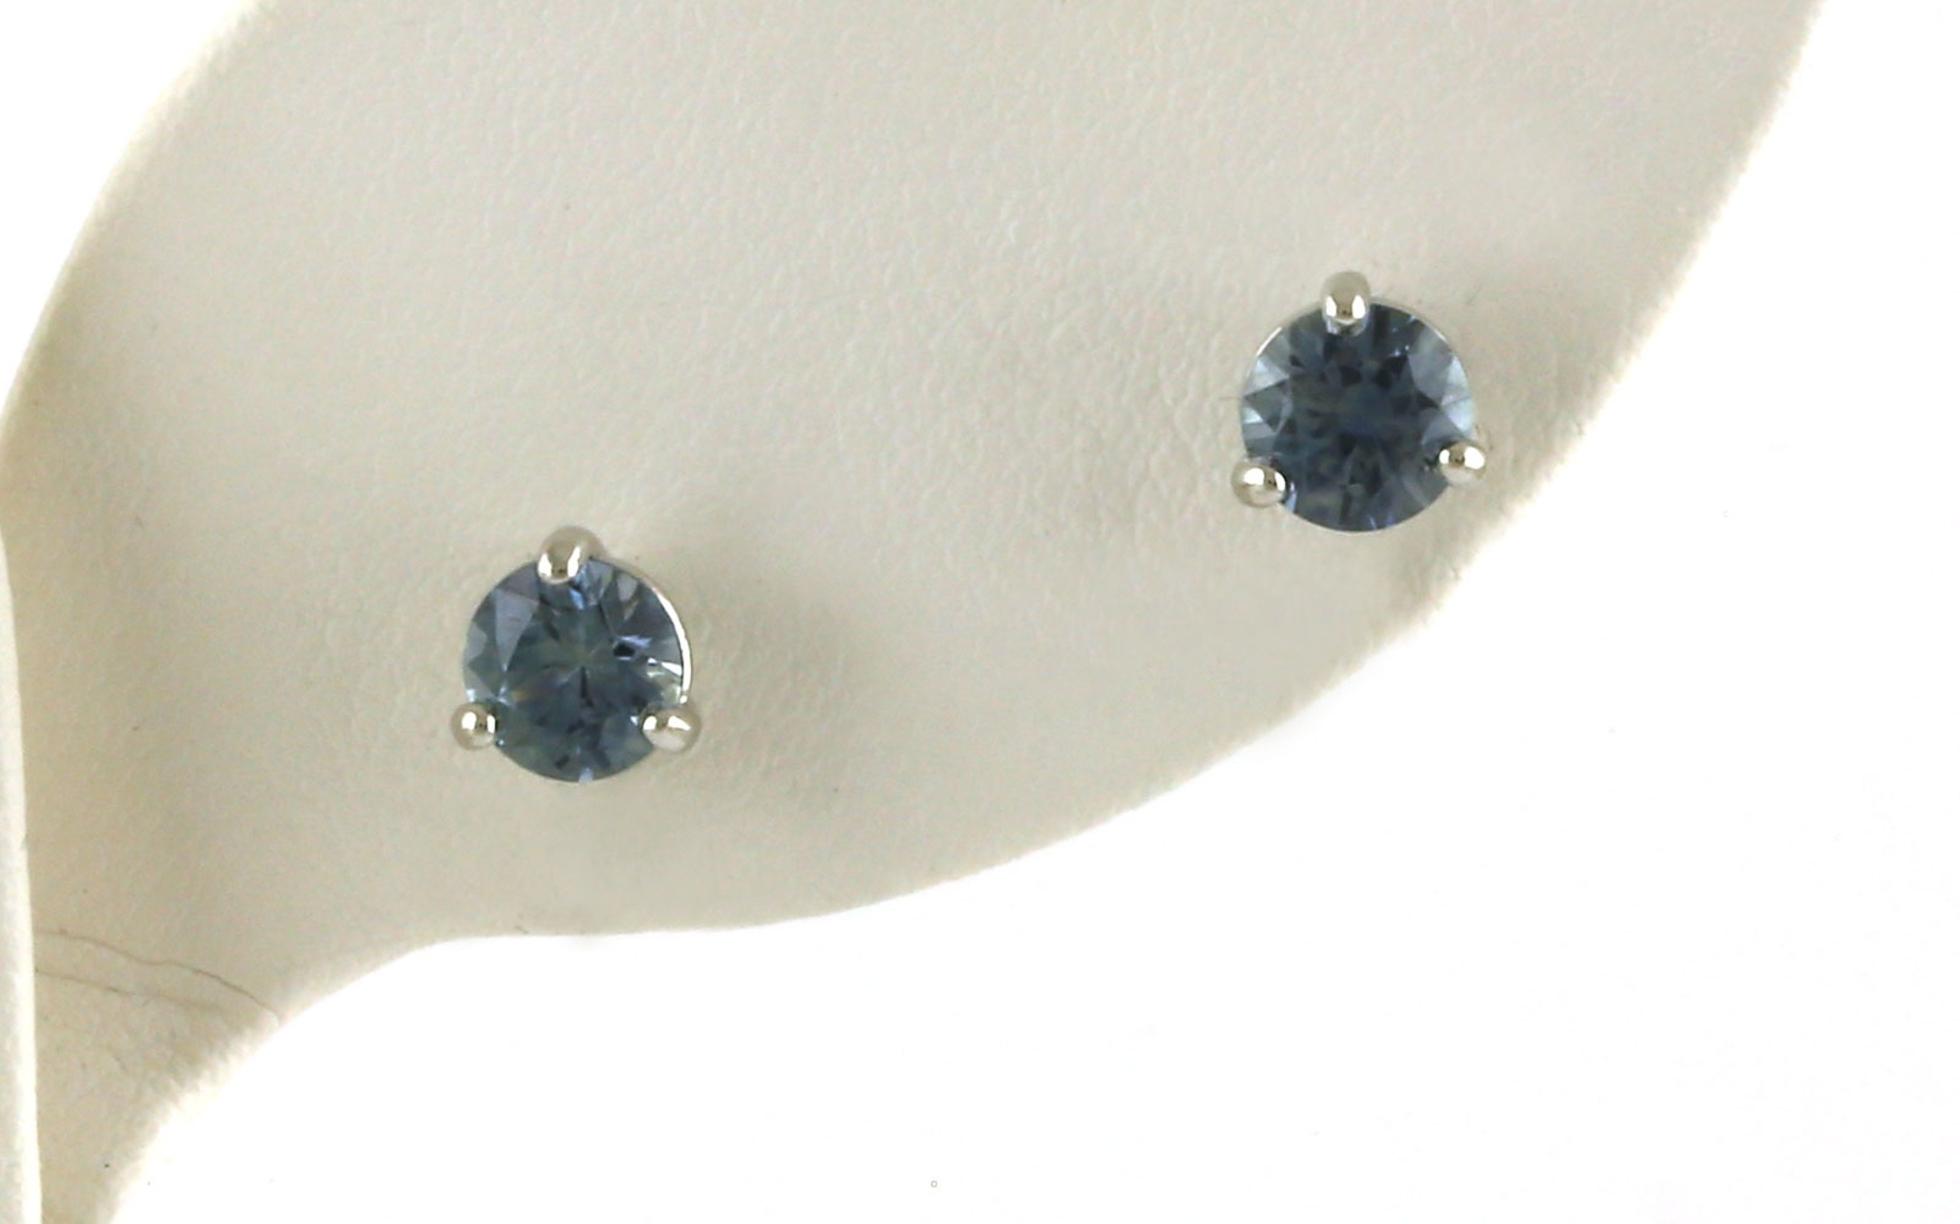 Montana Sapphire Stud Earrings in 3-Prong Martini Settings in White Gold (1.23cts TWT)